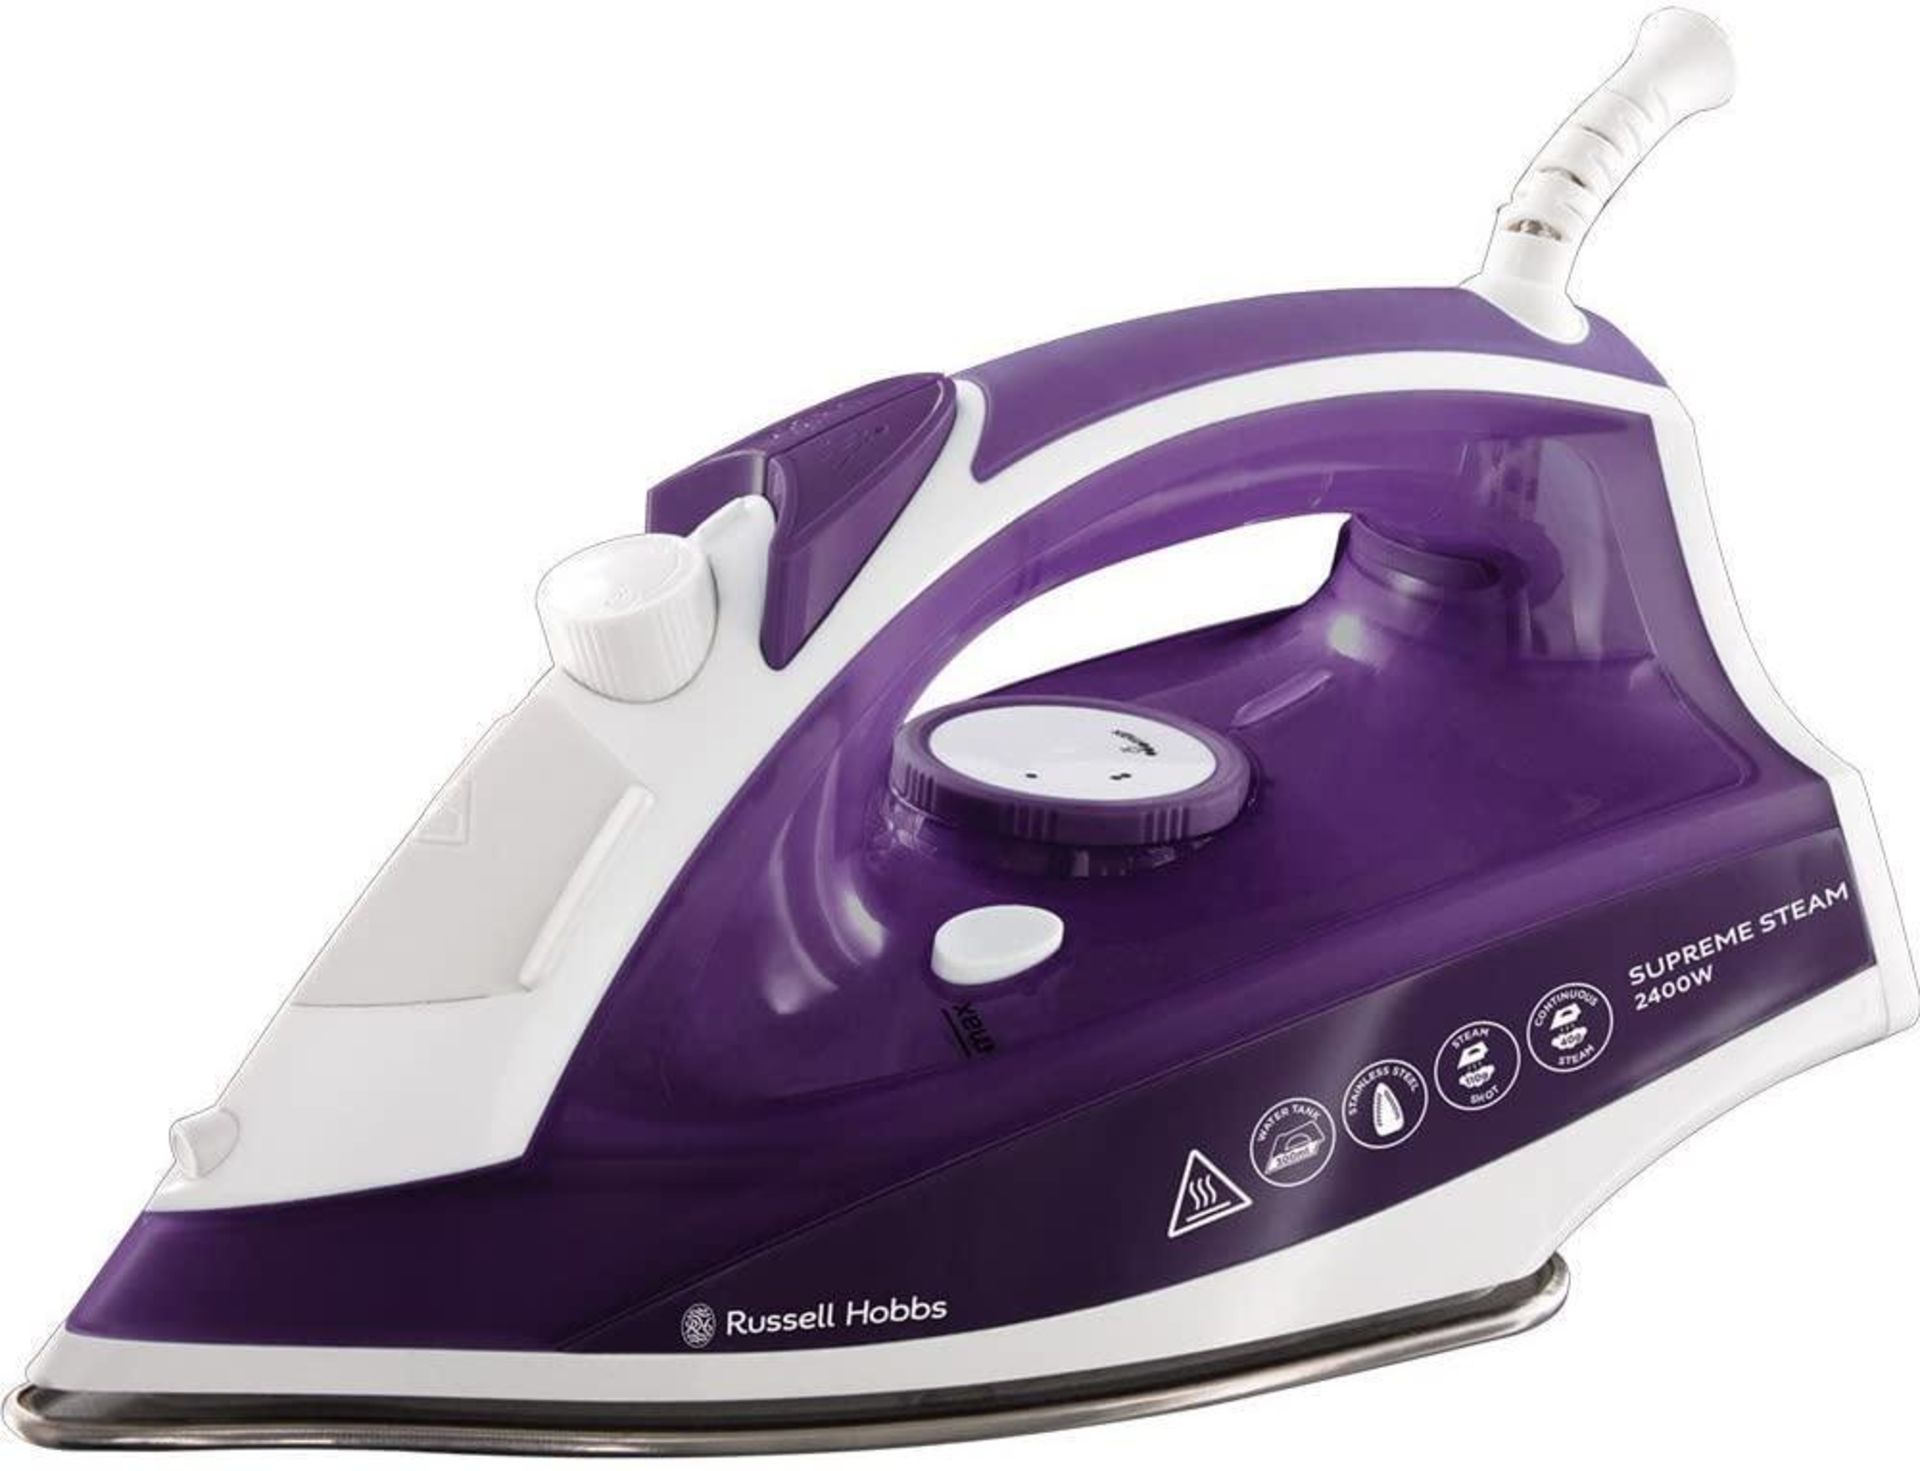 Russell Hobbs Supreme Steam Traditional Iron 23060, 2400 W, Purple/White £16.99 RRP